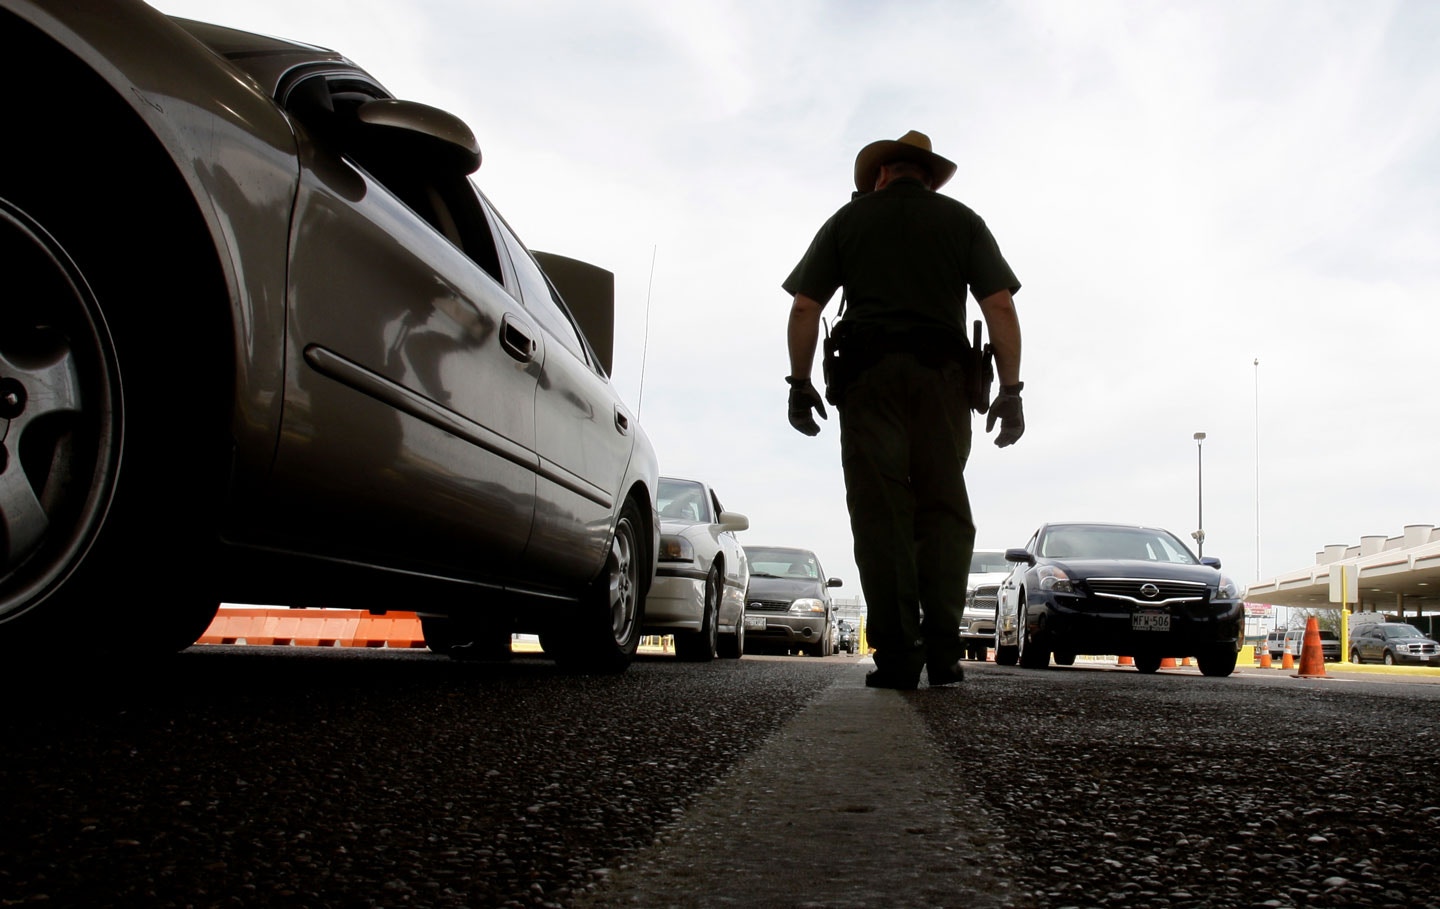 A U.S. Customs and Border Protection agent checks traffic leaving the U.S. to Mexico in Laredo, Texas, Thursday, April 23, 2009.  (AP Photo/LM Otero)